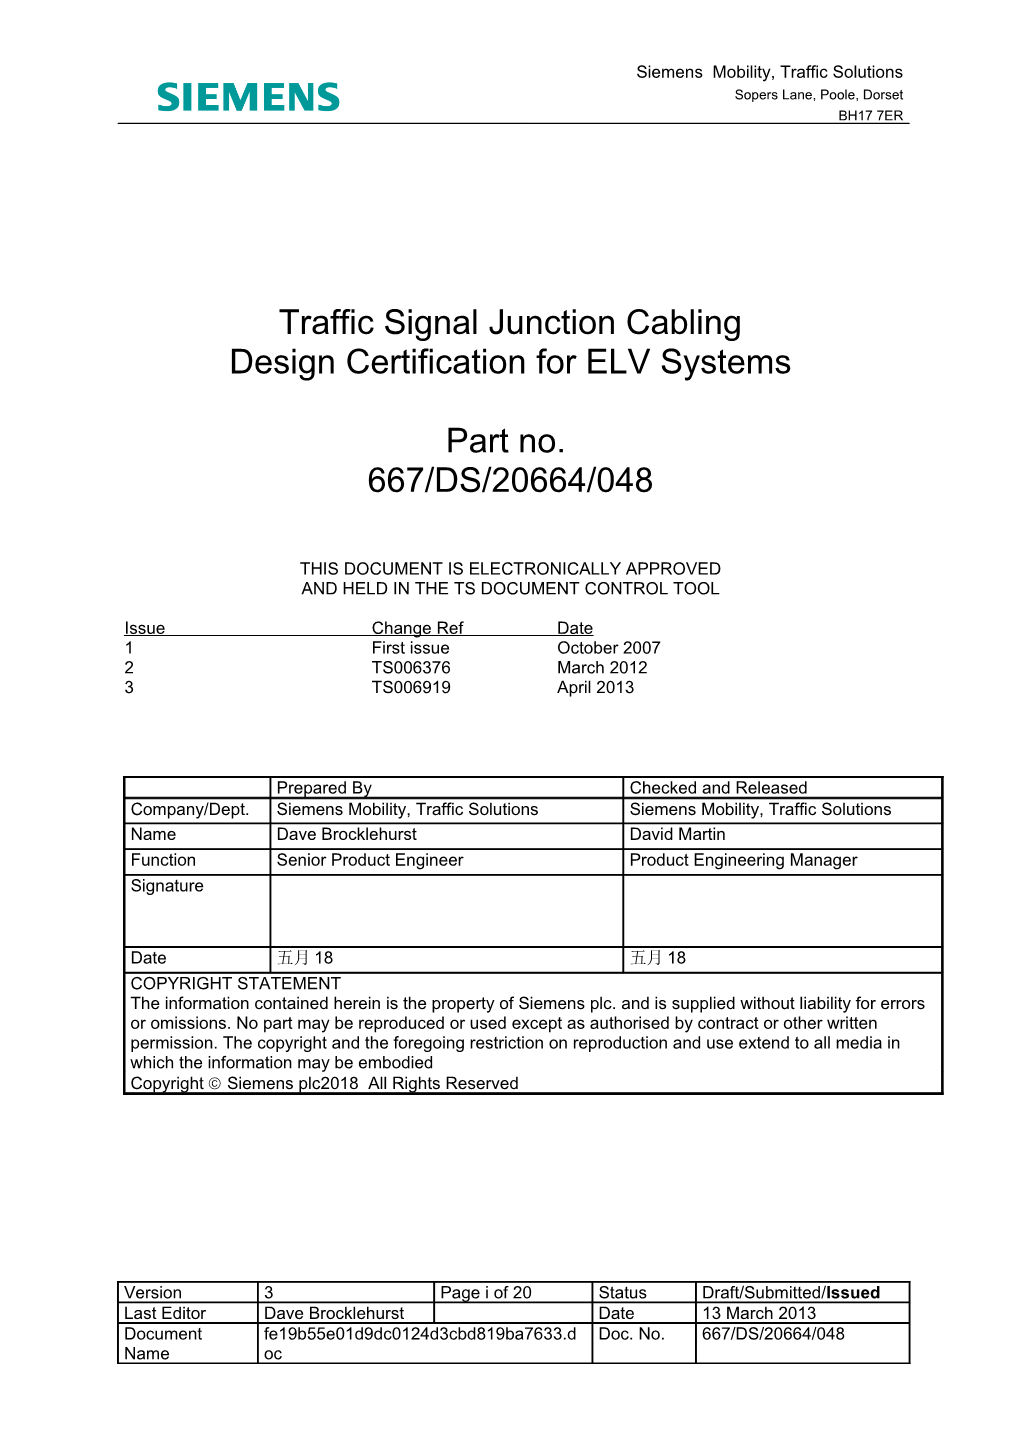 Traffic Signal Junction Cabling Design Certification for Elv Systems